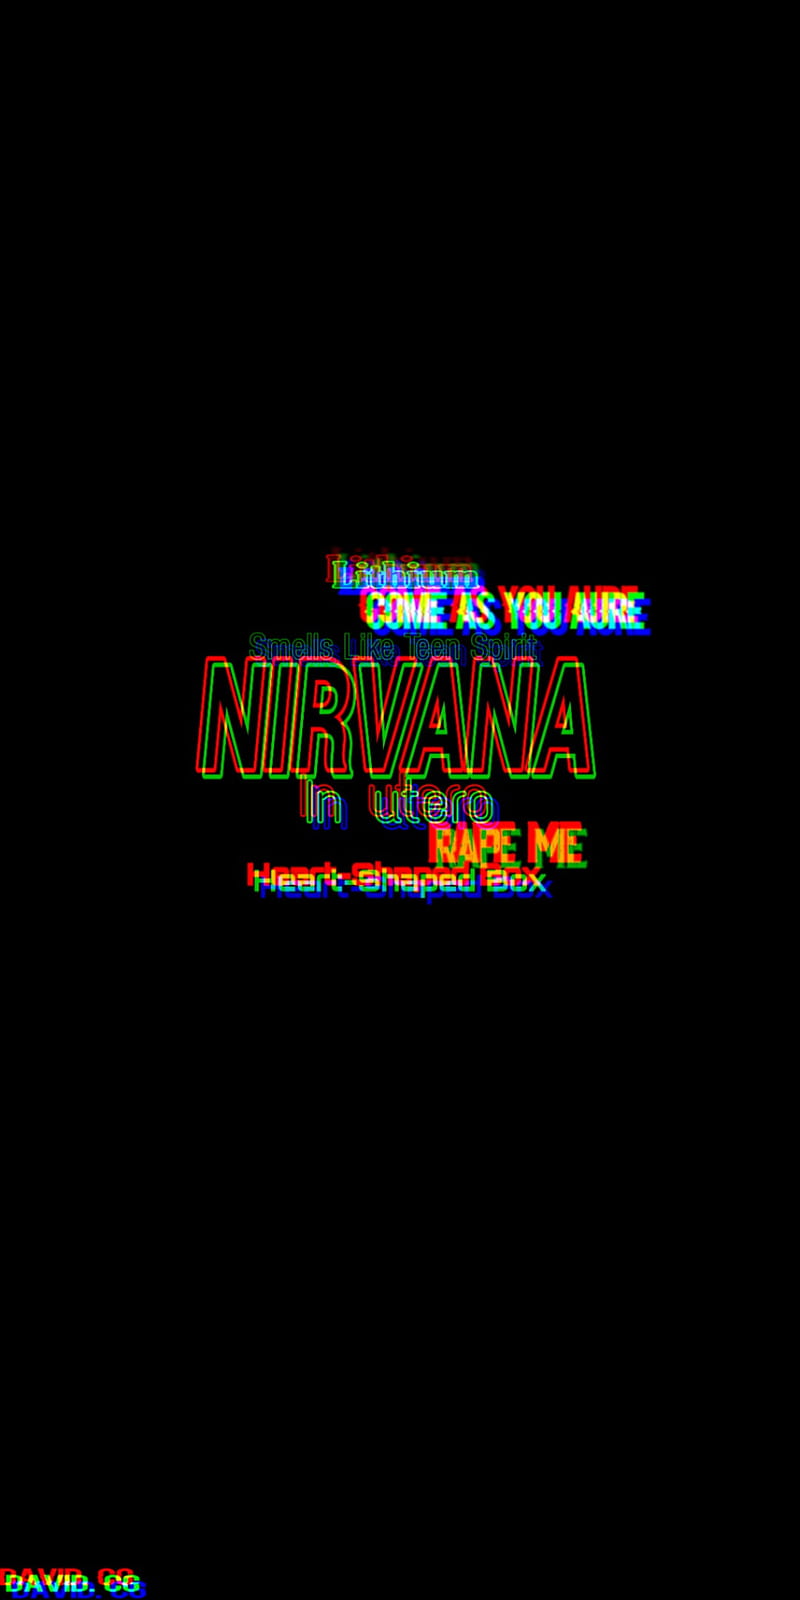 Nirvana wallpaper for iPhone and Android phone. - Nirvana